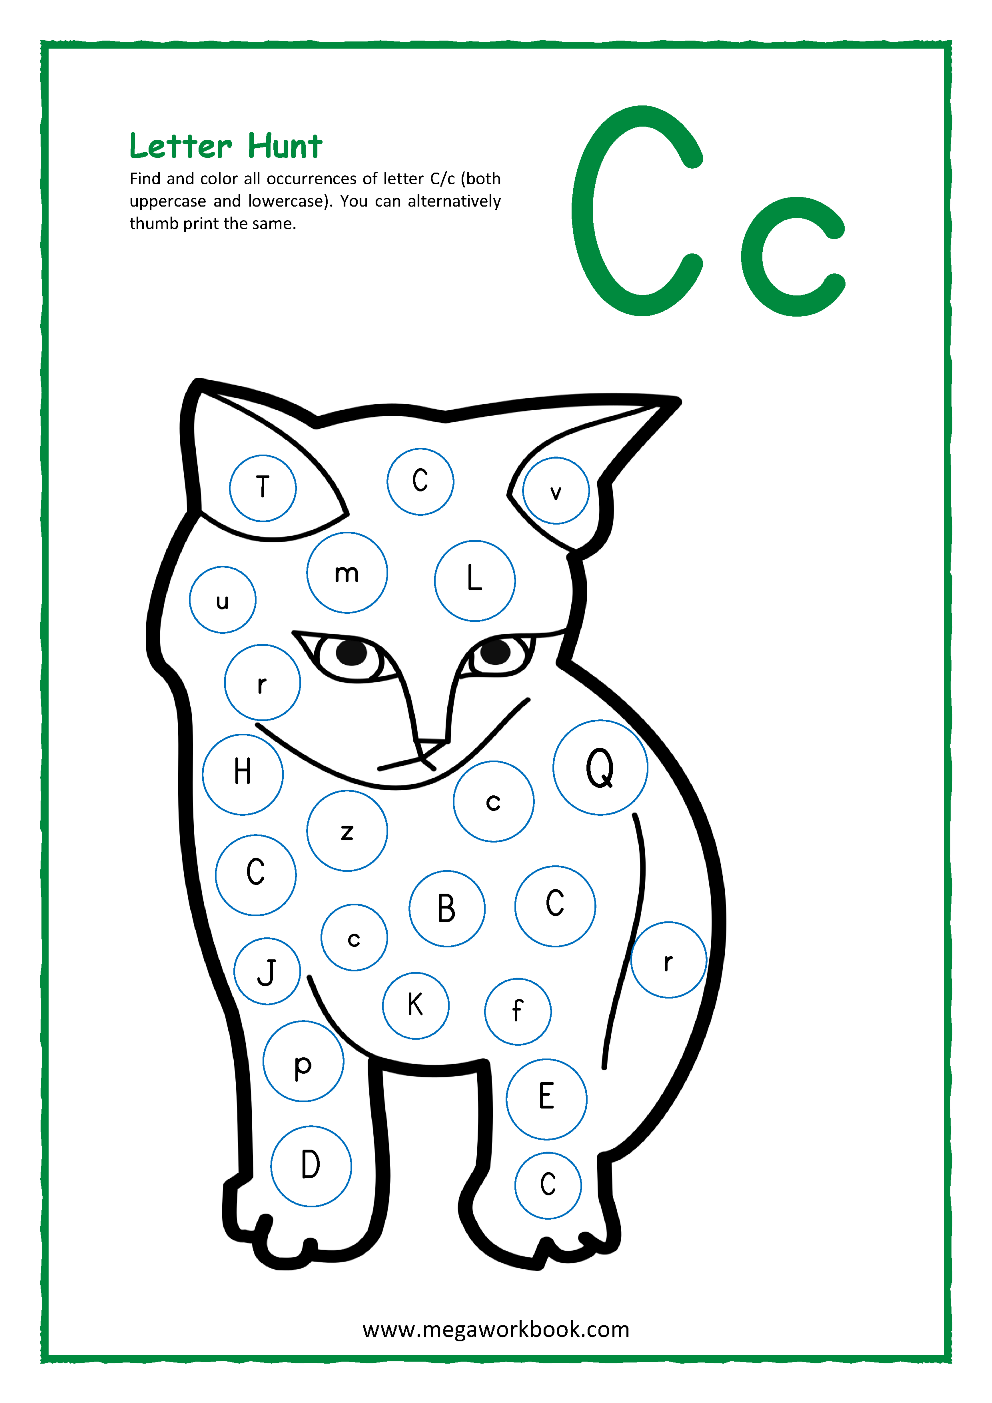 my-letter-c-coloring-page-twisty-noodle-pin-on-worksheets-kg-jayden-tate